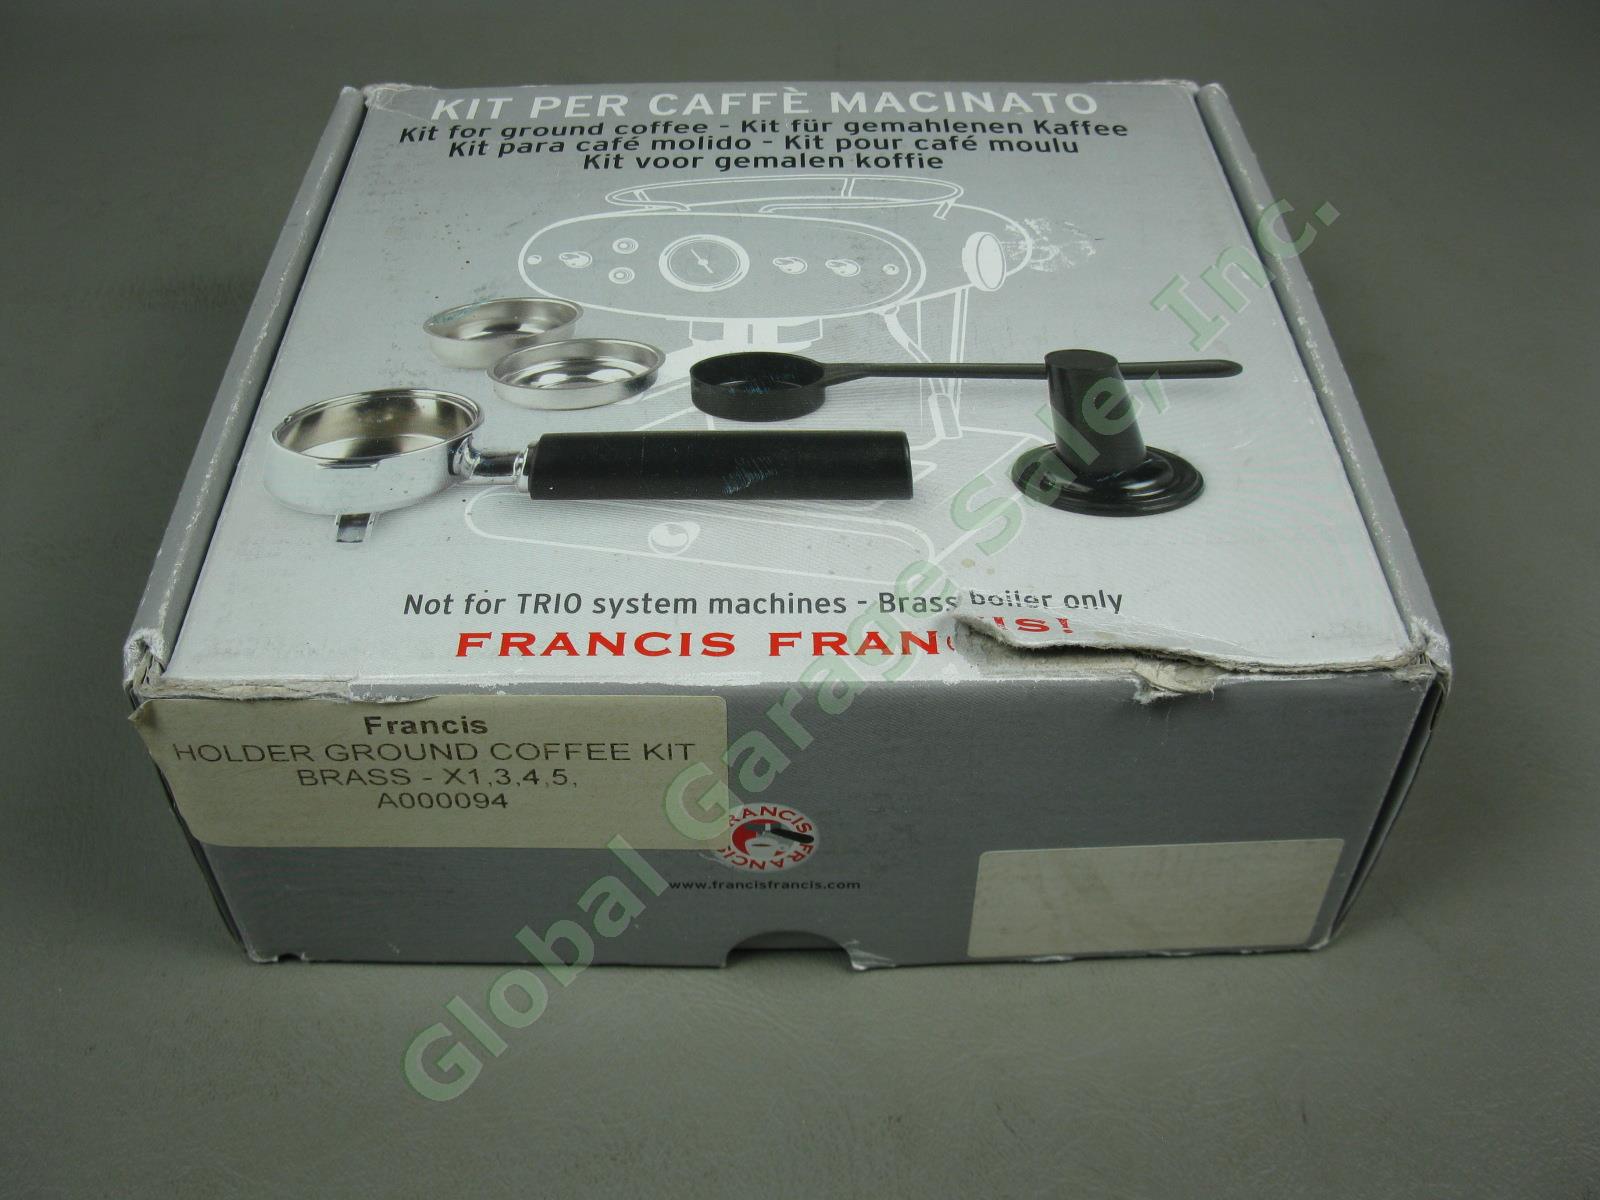 Illy Francis Holder Ground Espresso Coffee Kit A000094 For Brass Boiler X1,3,4,5 5